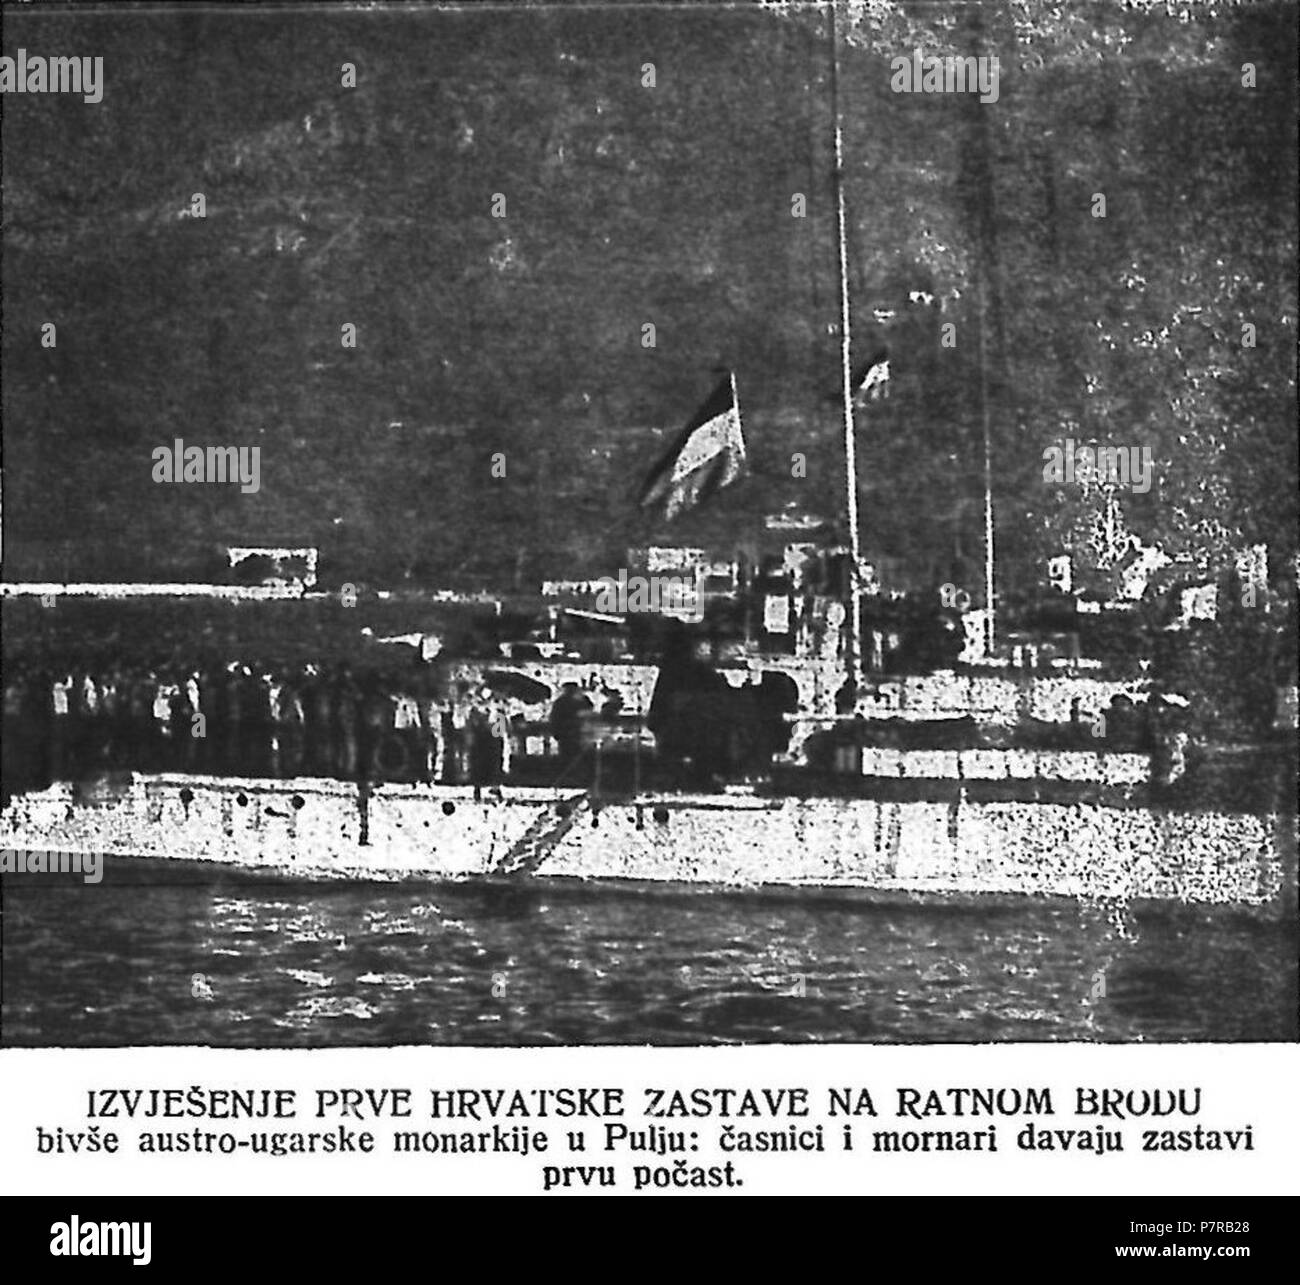 English: First Croatian flag ever hoisted on a naval ship, Pula, October 31st, 1918, with the crews saluting the flag. The ships were previously in service with Austro-Hungarian Navy. The entire fleet was ordered by the emperor Charles I to be transferred to fledgling Croatian authorities during the breakup of Austria-Hungary at the end of WWI. 16 September 2016, 18:20:39 322 Prva hrvatska zastava 52 3 1919 dis Stock Photo